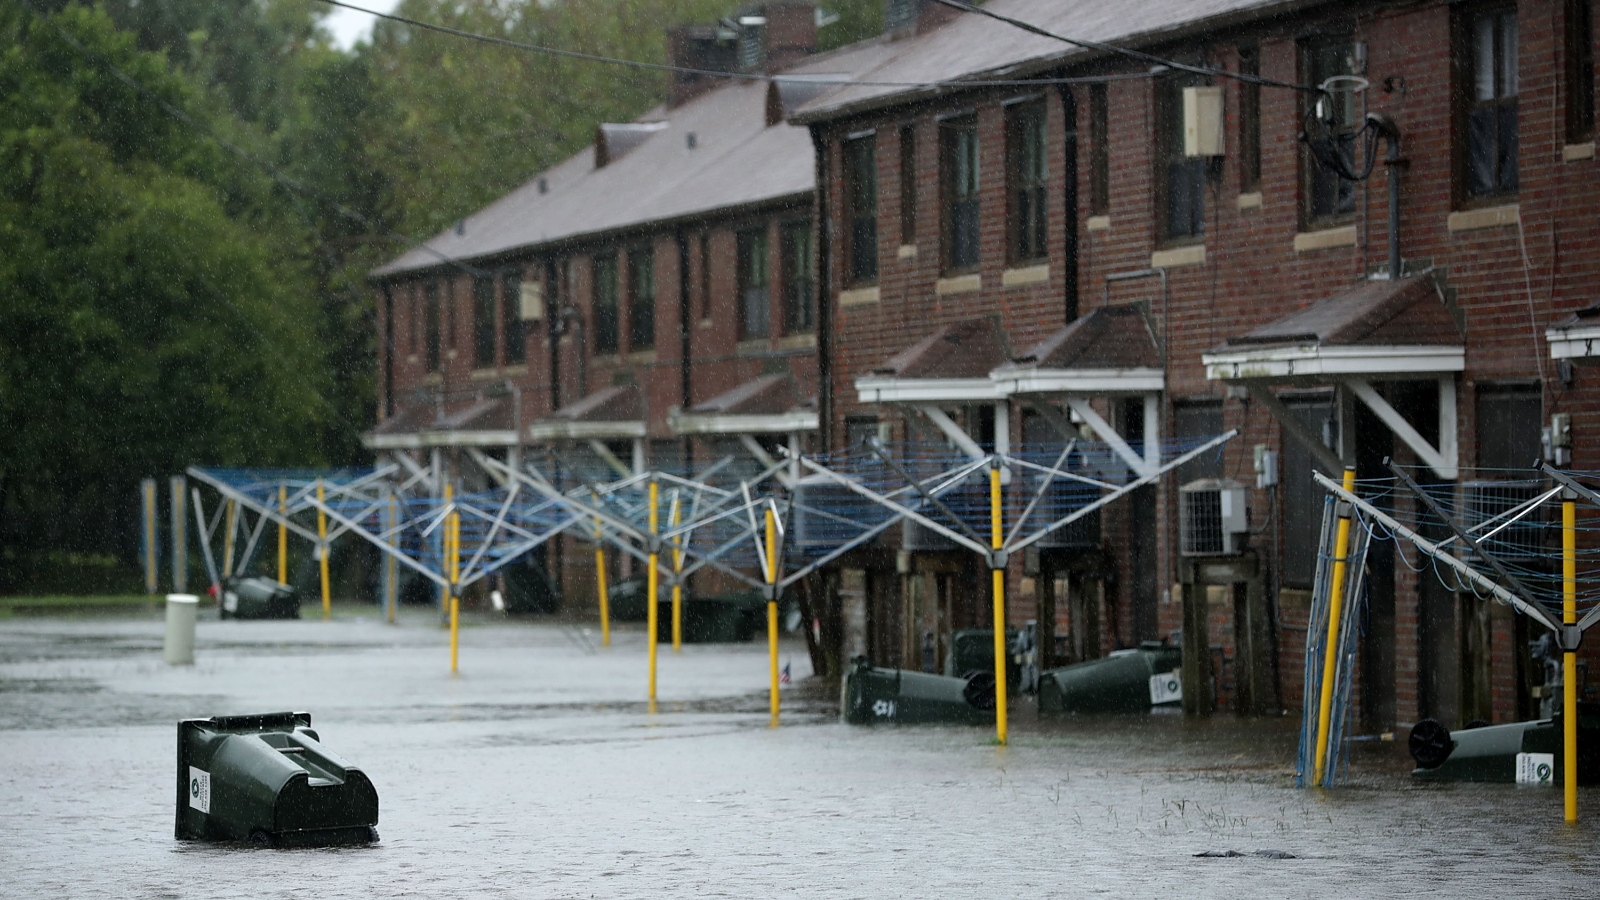 A trash can floats through the Trent Court public housing project in New Bern, North Carolina after Hurricane Florence in September 2018.